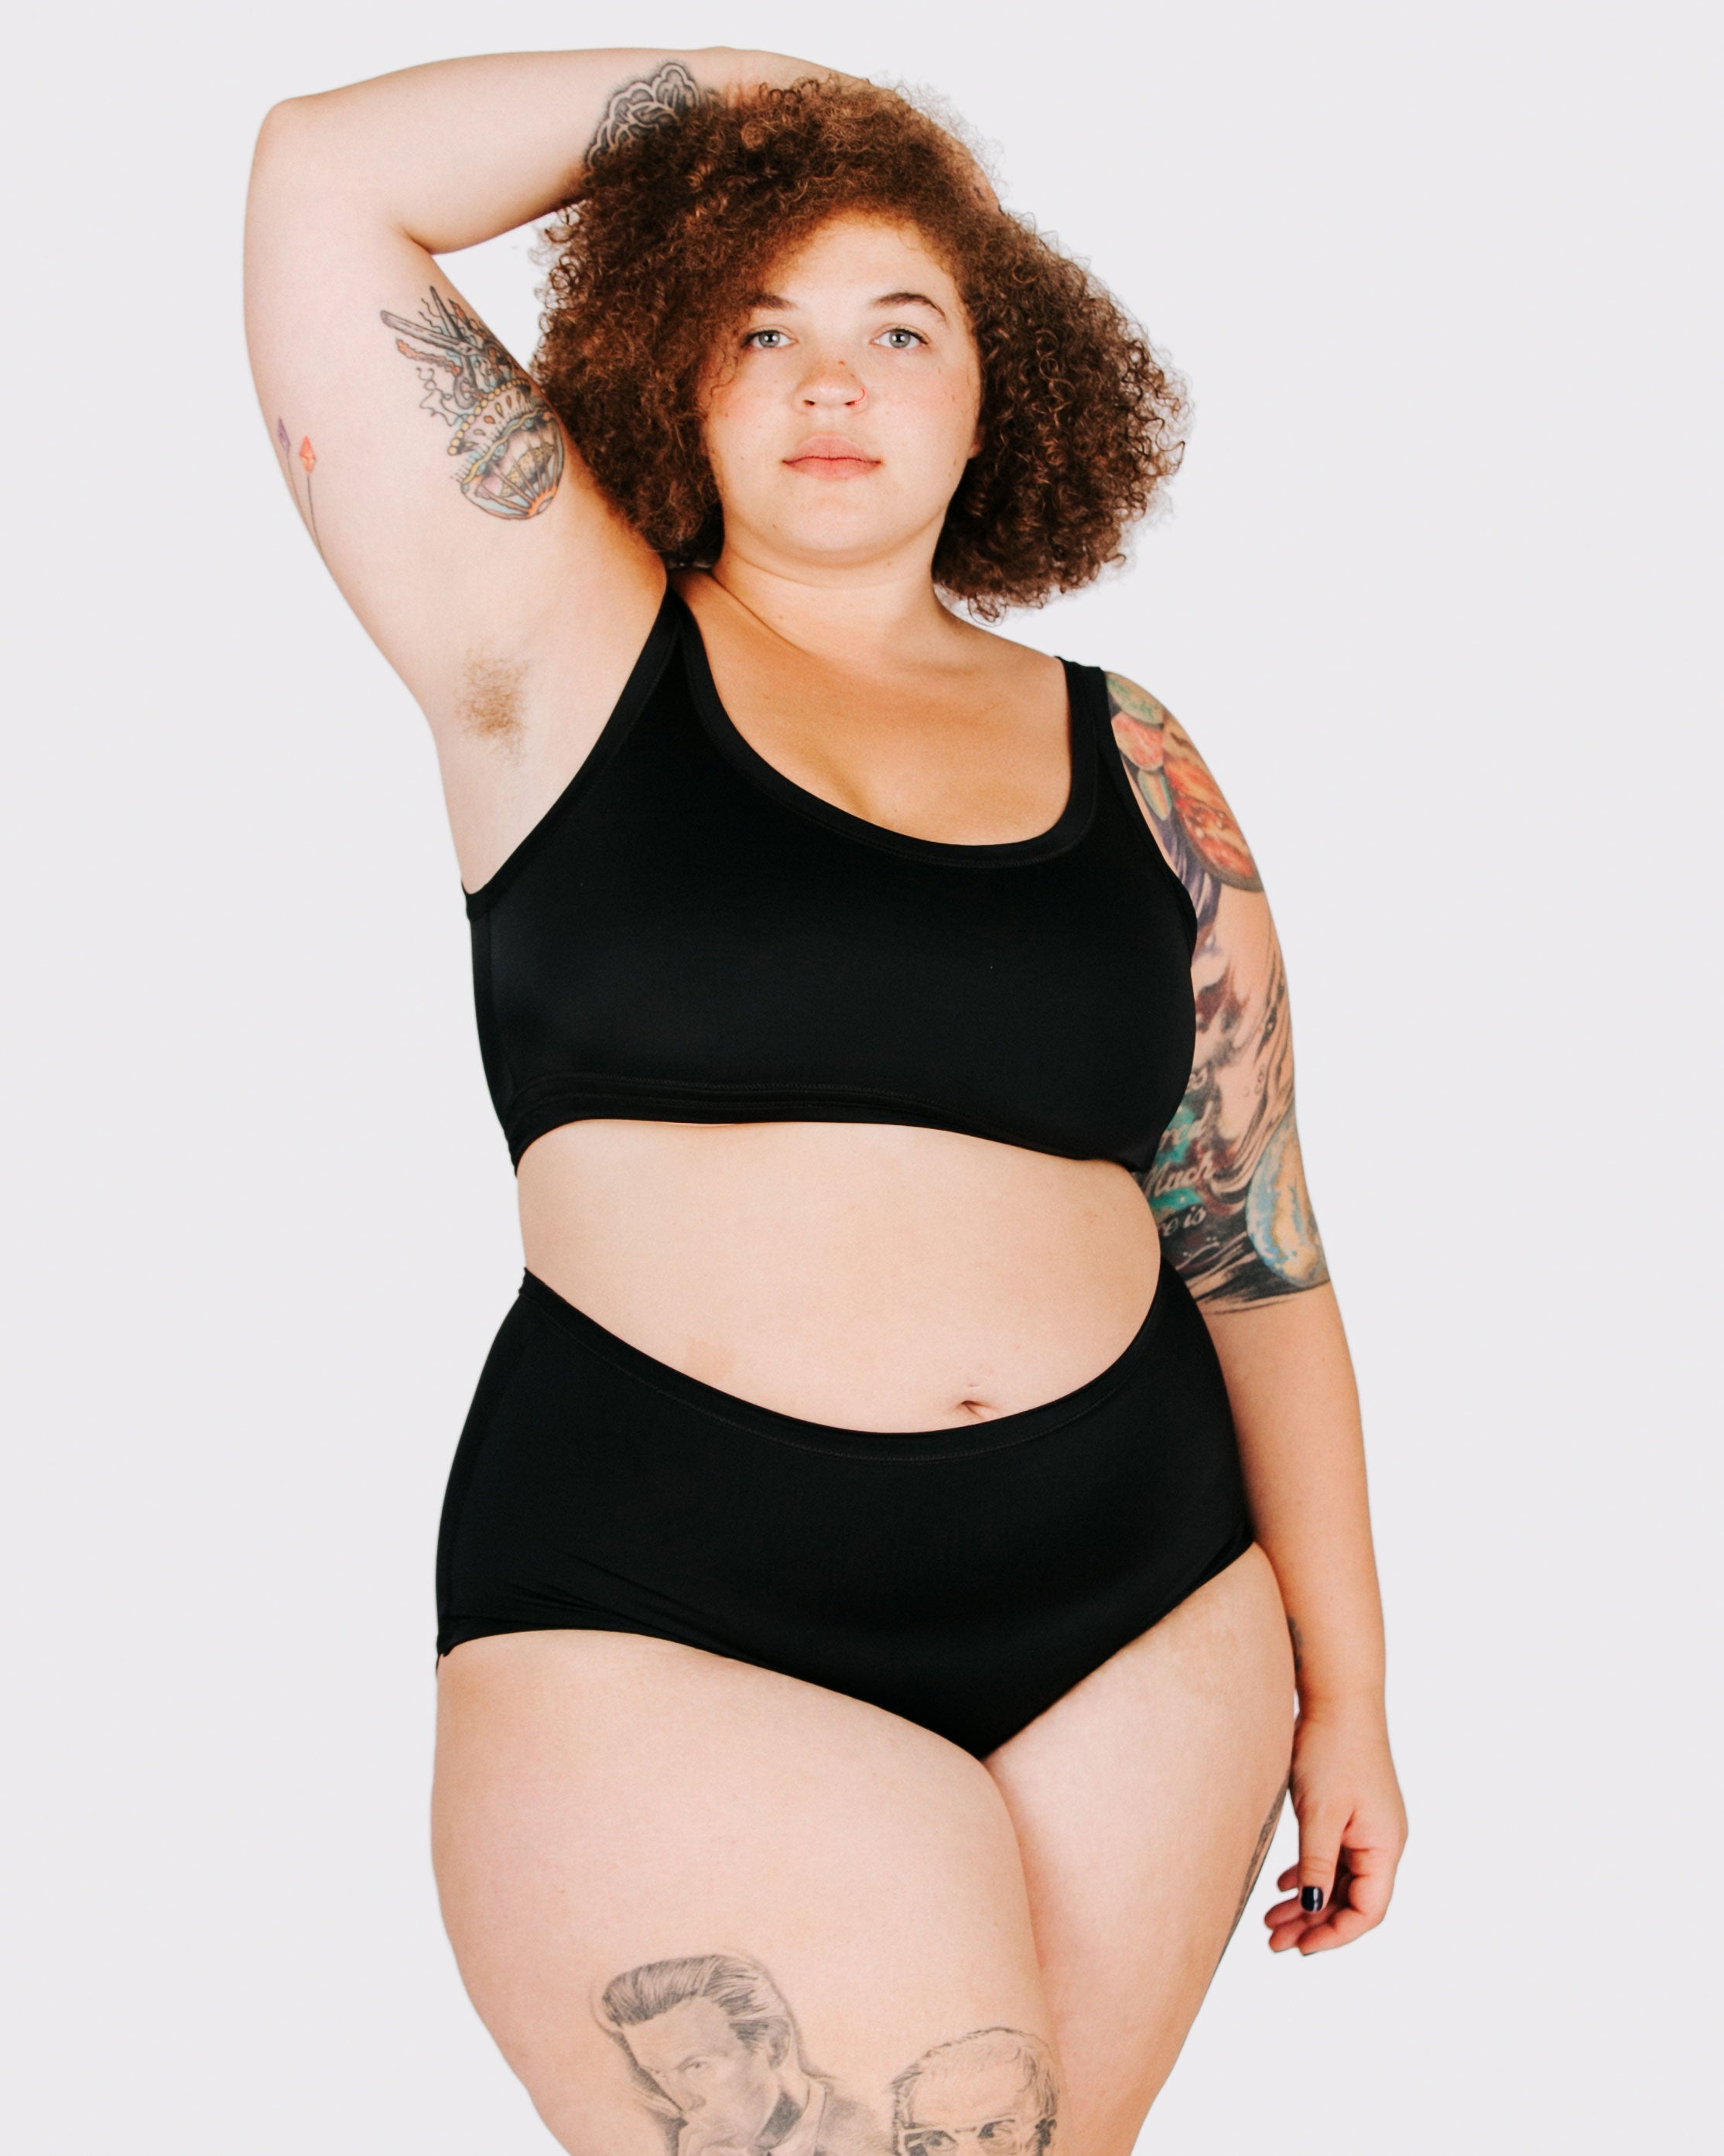 Fit photo from the front of Thunderpants recycled nylon Swimwear Original style bottoms in Plain Black on a model.